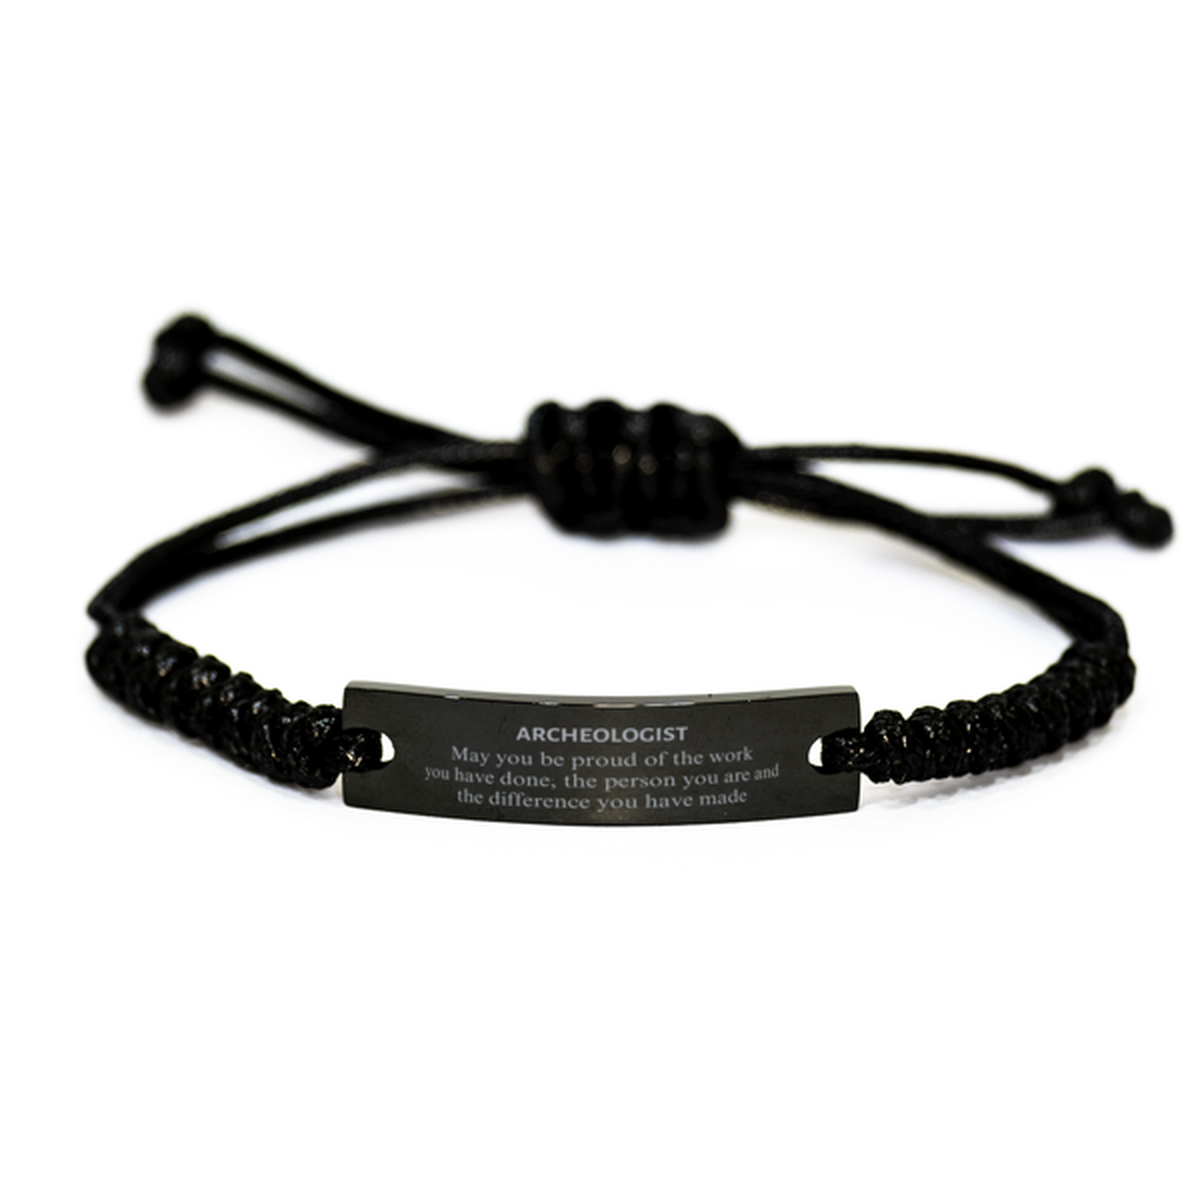 Archeologist May you be proud of the work you have done, Retirement Archeologist Black Rope Bracelet for Colleague Appreciation Gifts Amazing for Archeologist